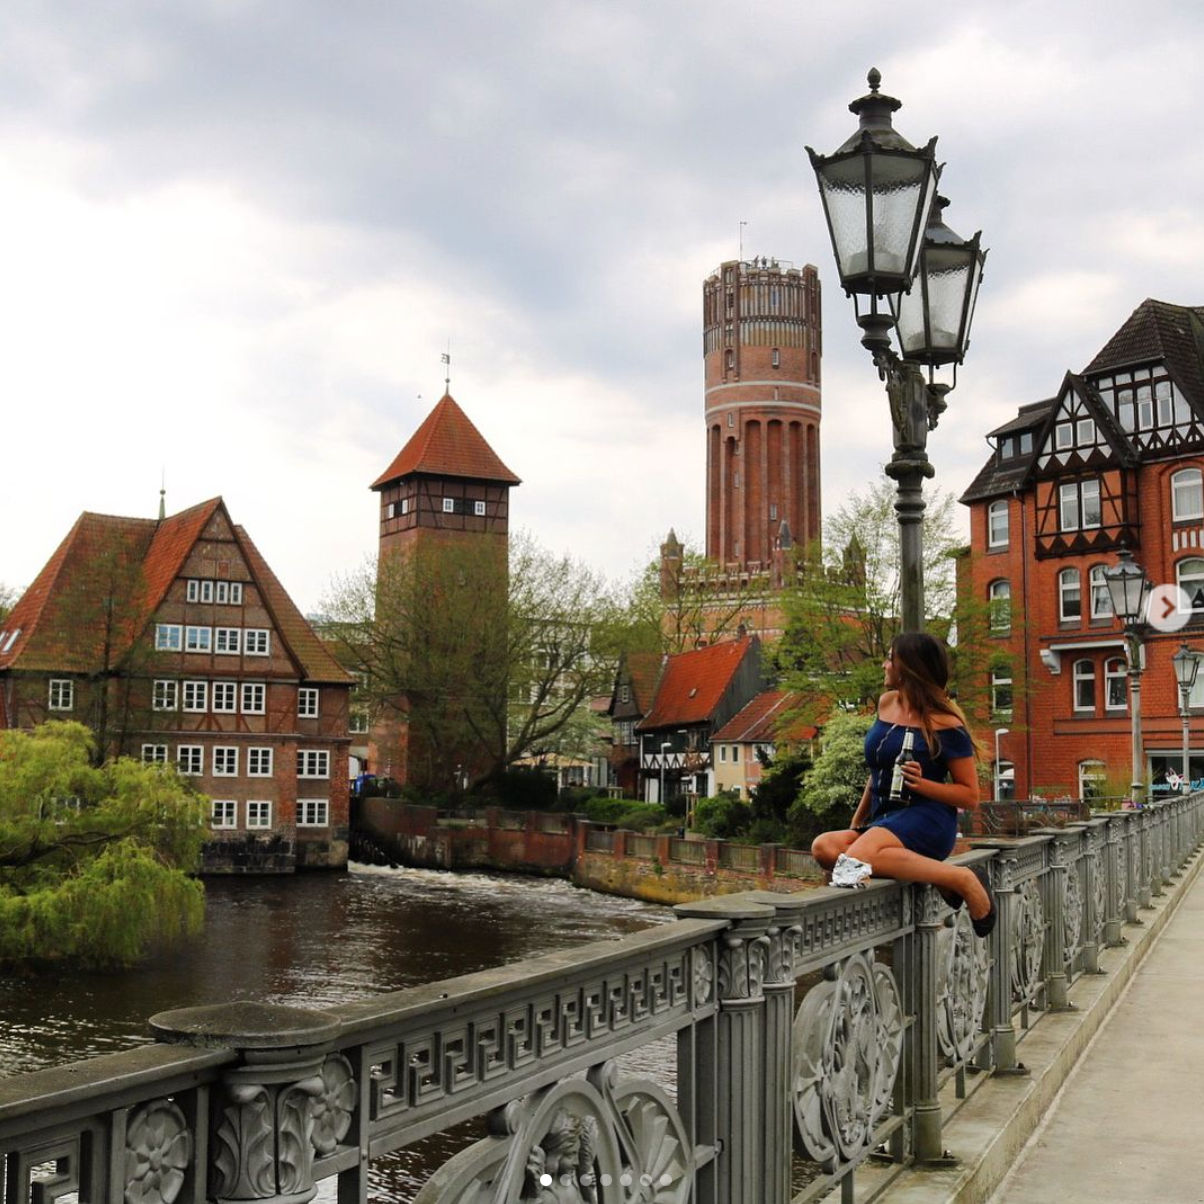 Luneburg, what to do in Hamburg for a day trip